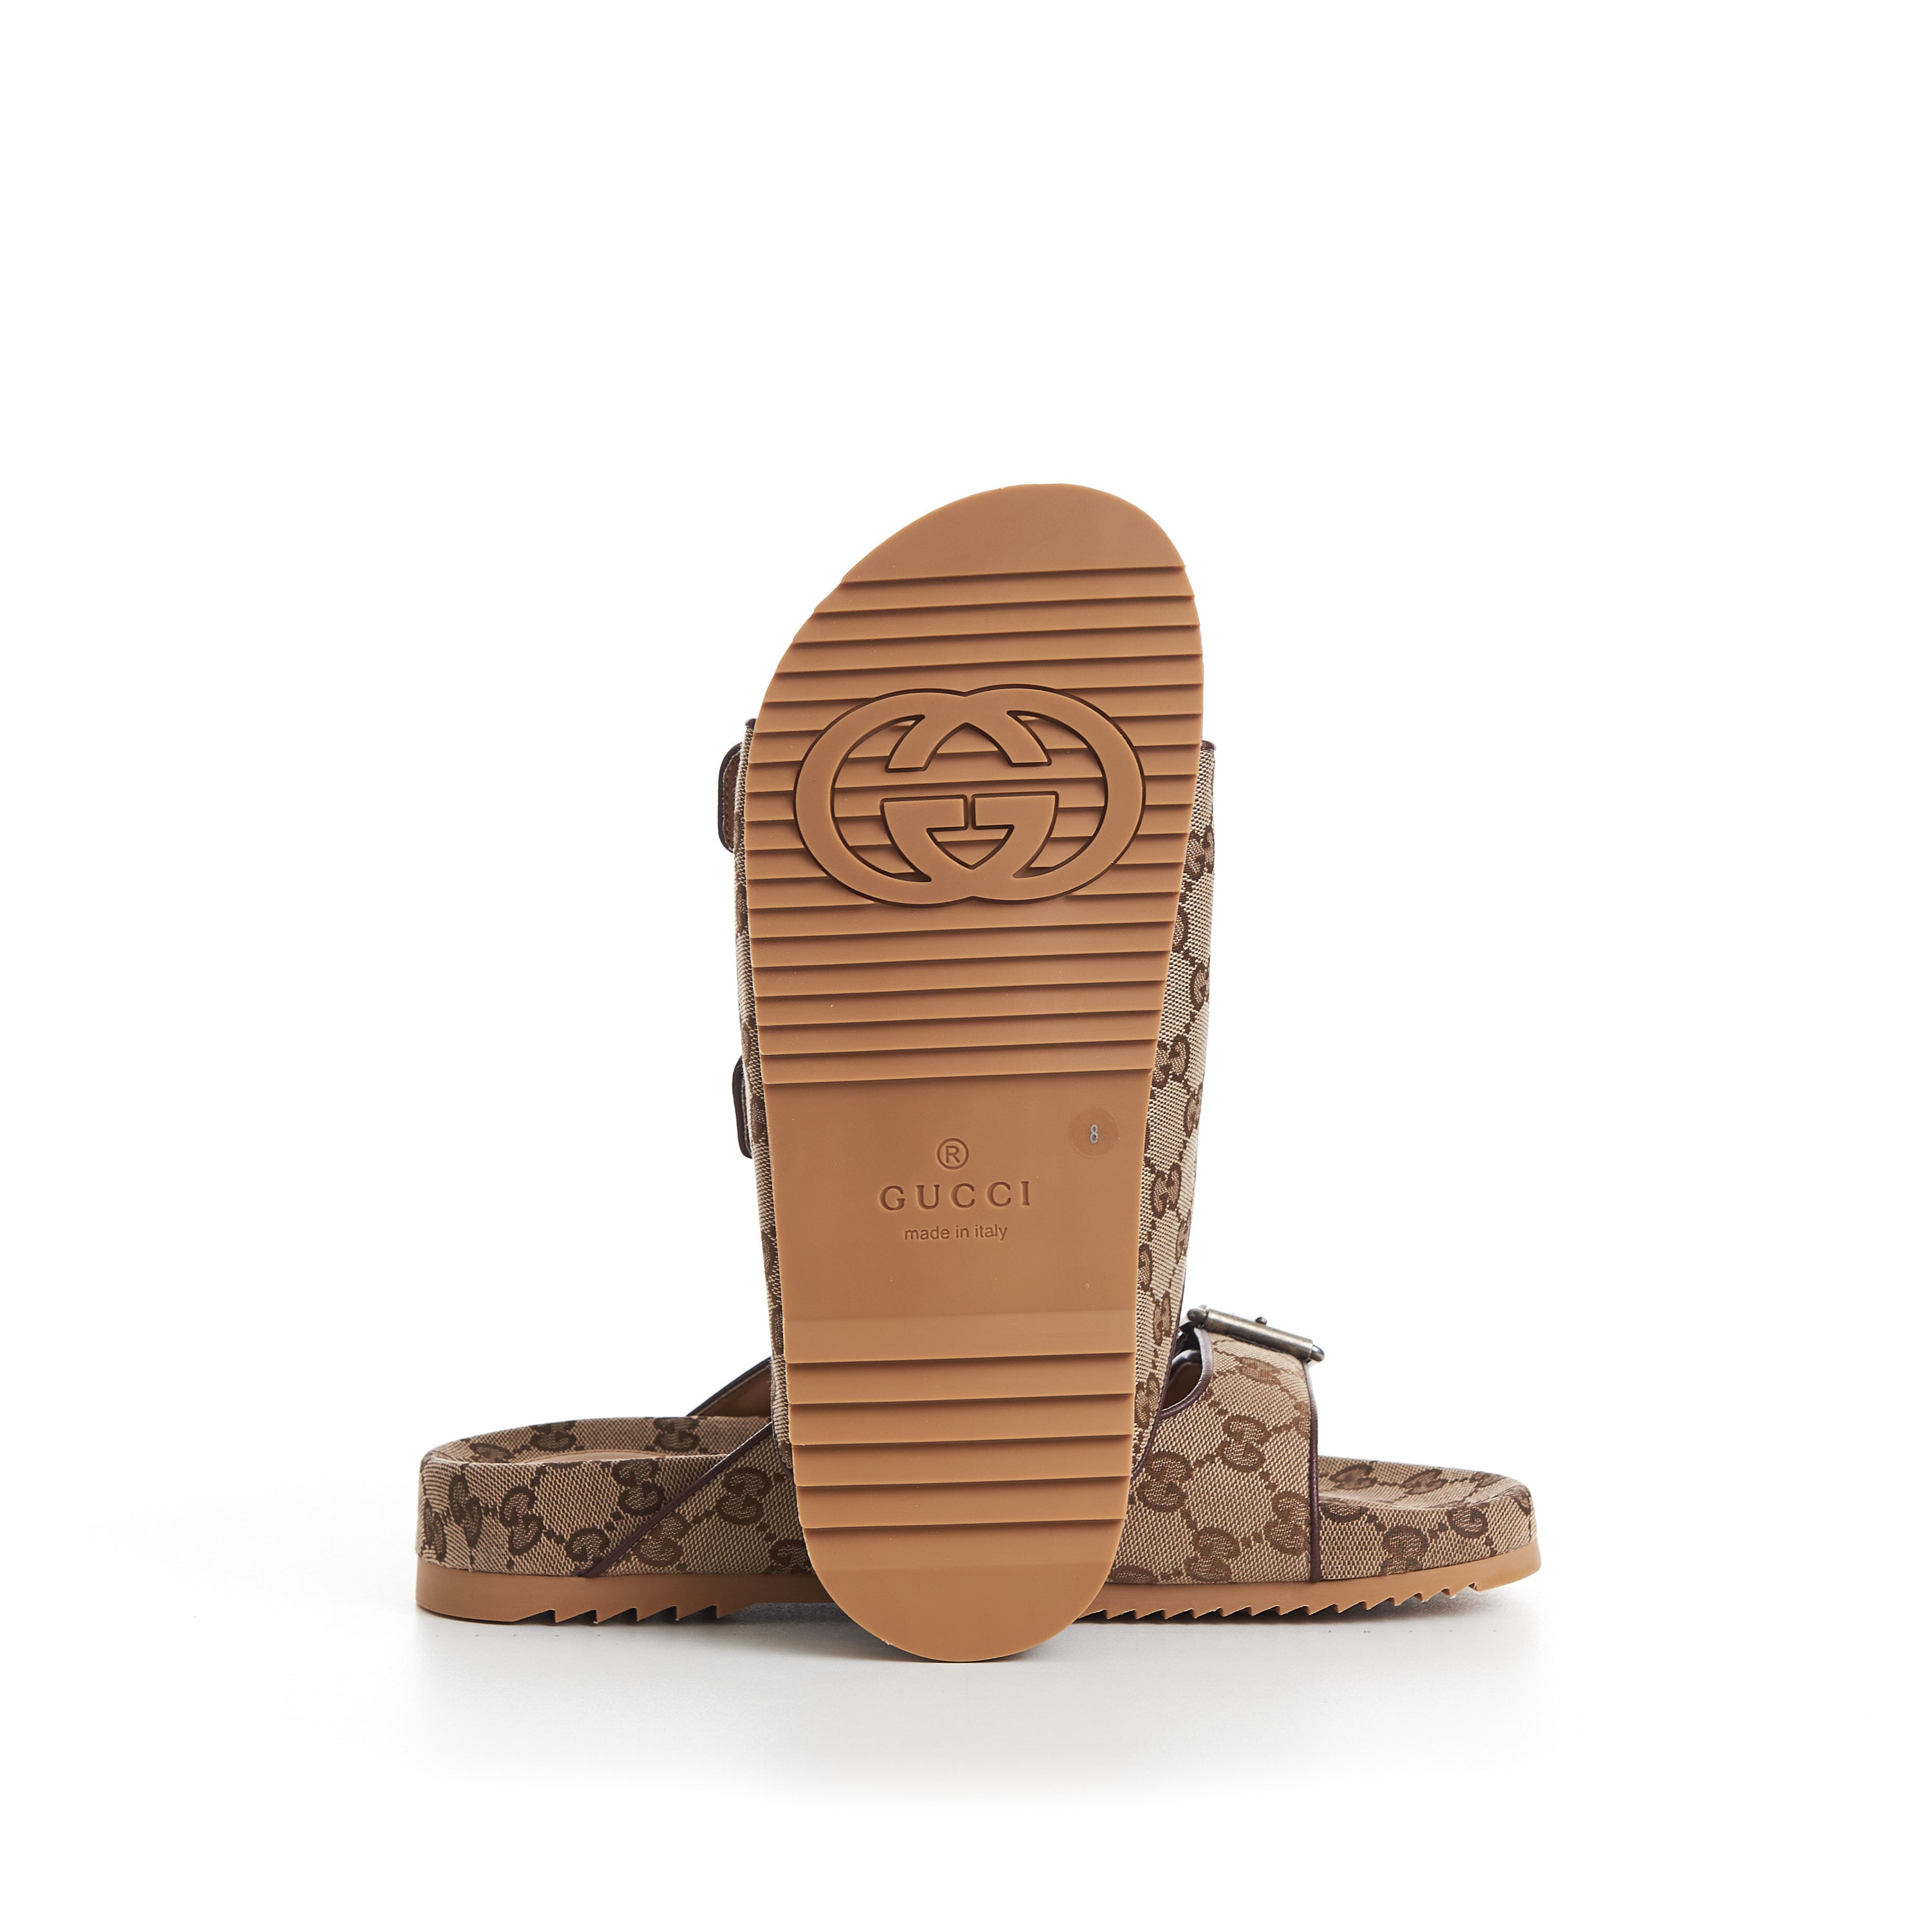 Men's slide sandal with straps in beige and ebony GG canvas